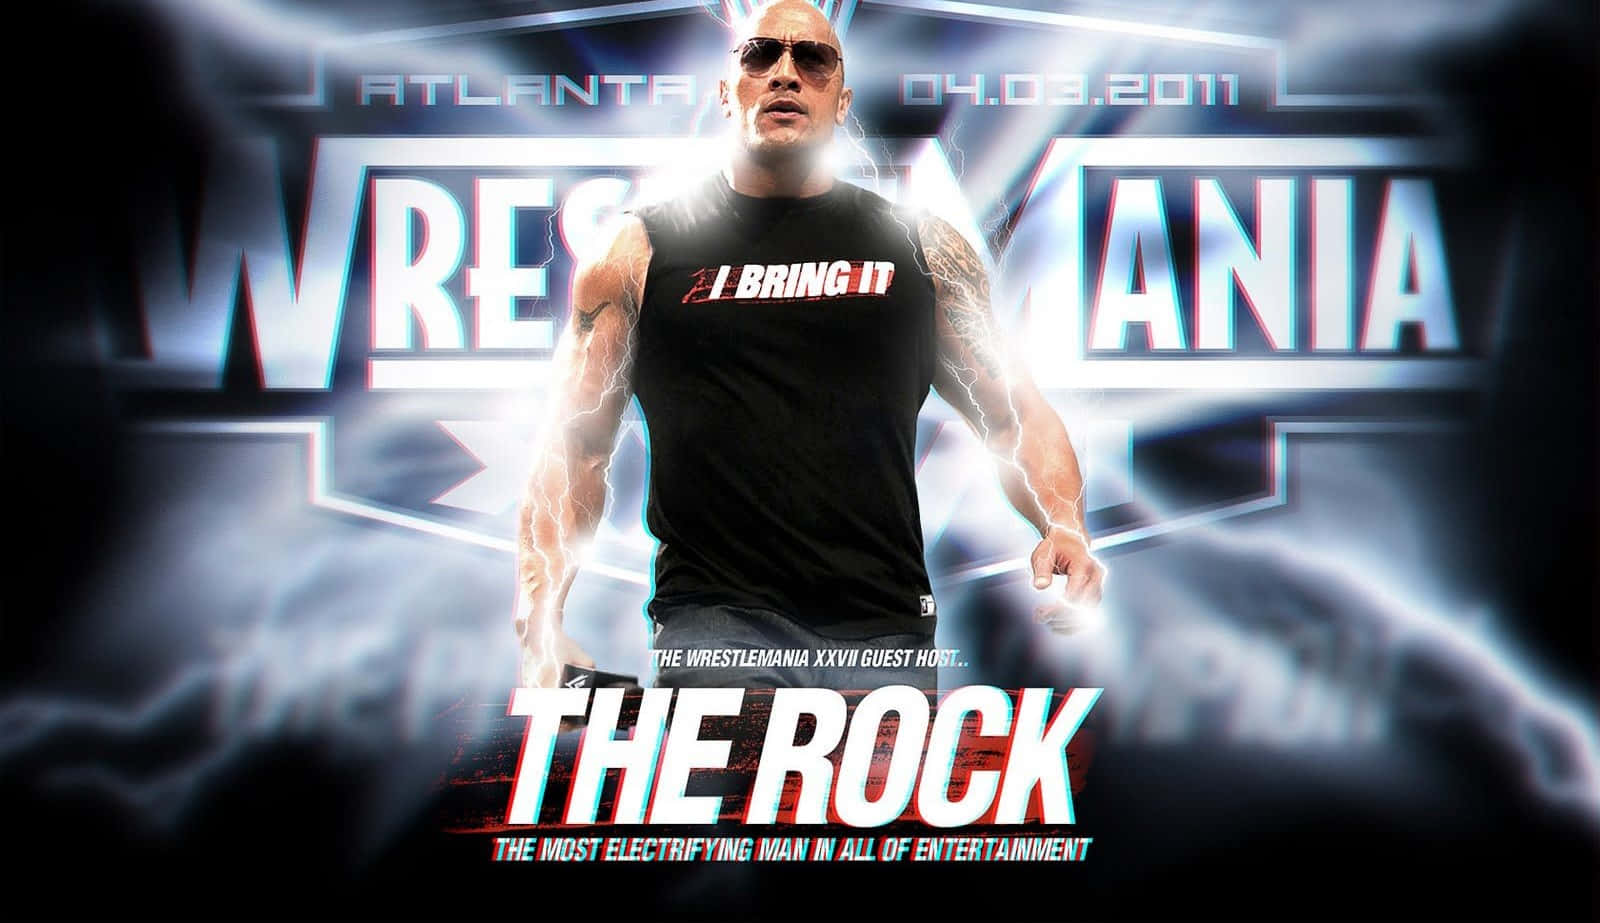 Dwayne "The Rock" Johnson brings strength and power to the big screen.